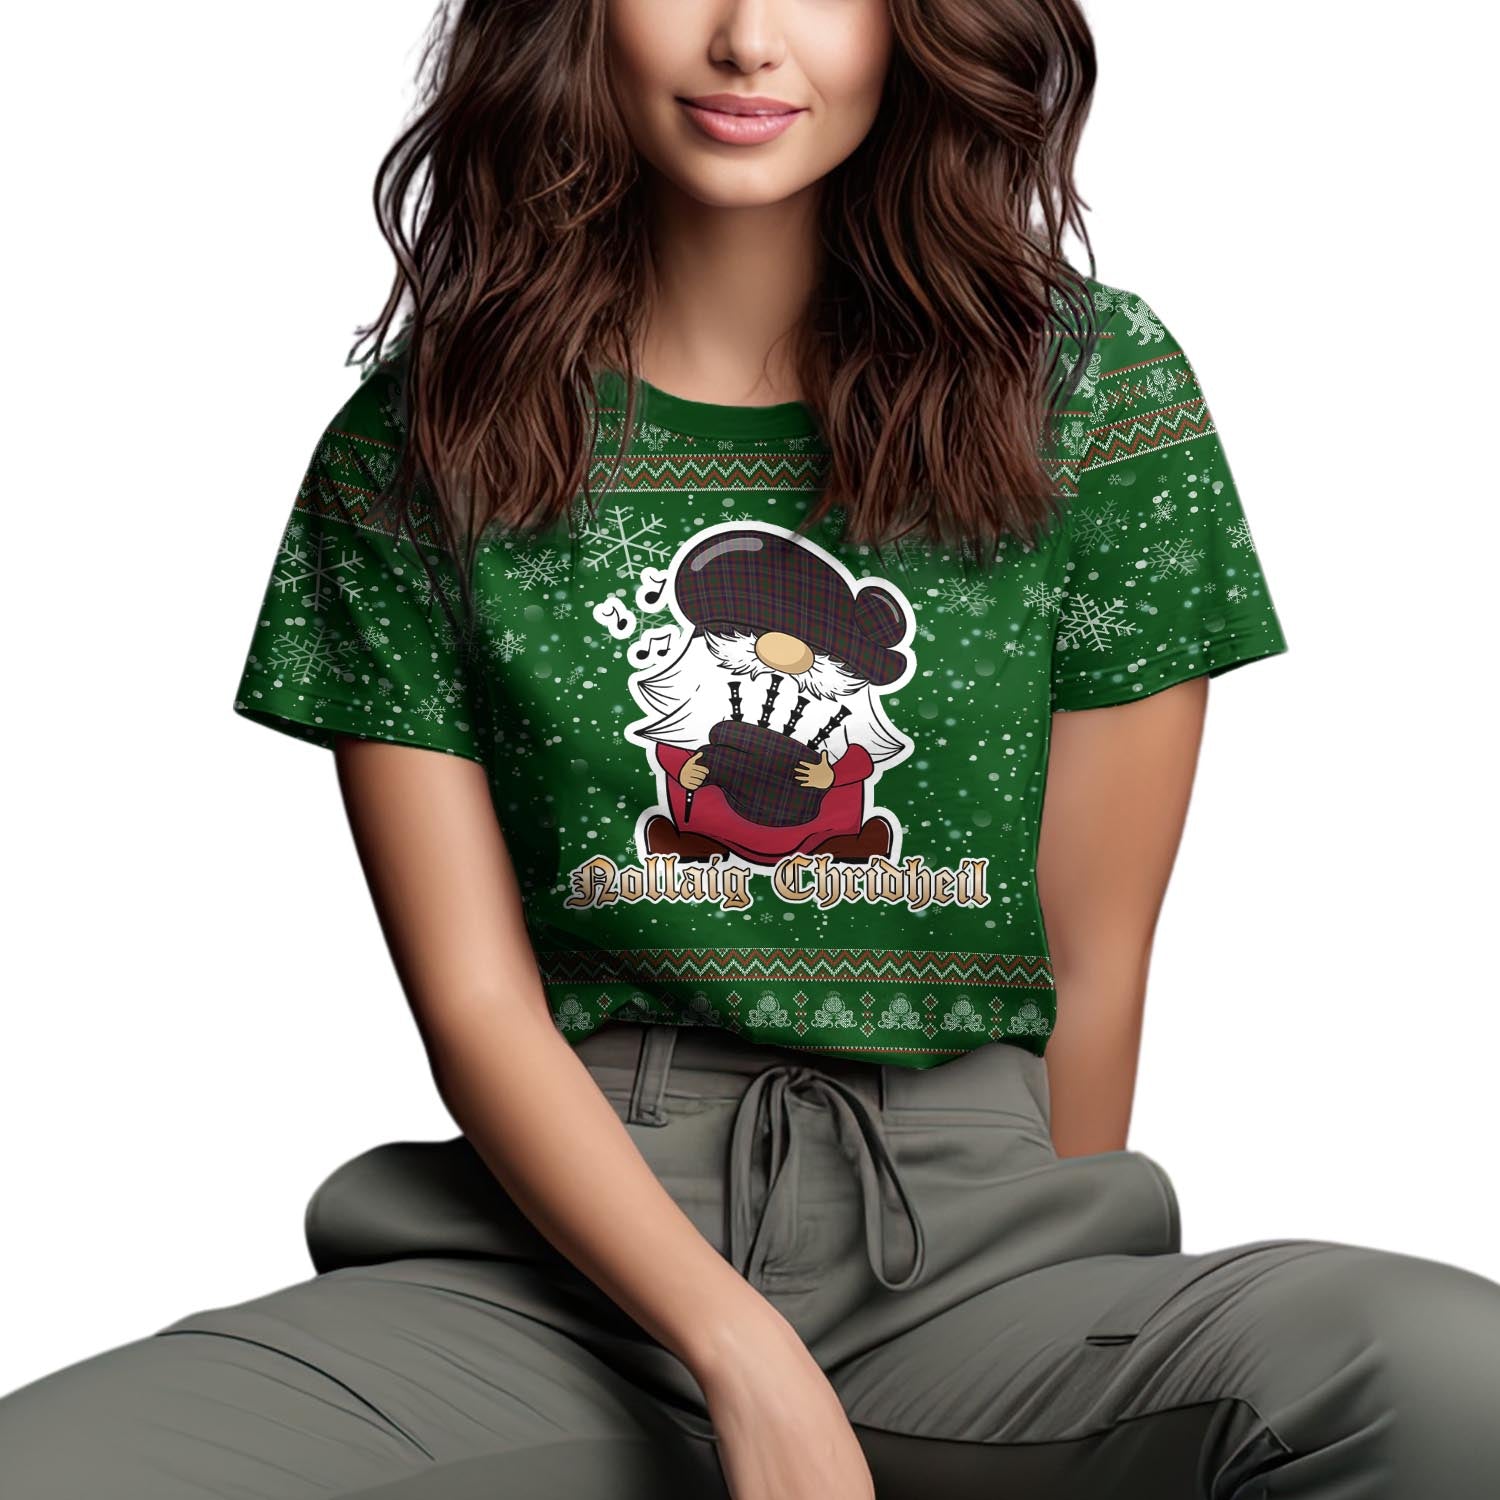 Cork County Ireland Clan Christmas Family T-Shirt with Funny Gnome Playing Bagpipes Women's Shirt Green - Tartanvibesclothing